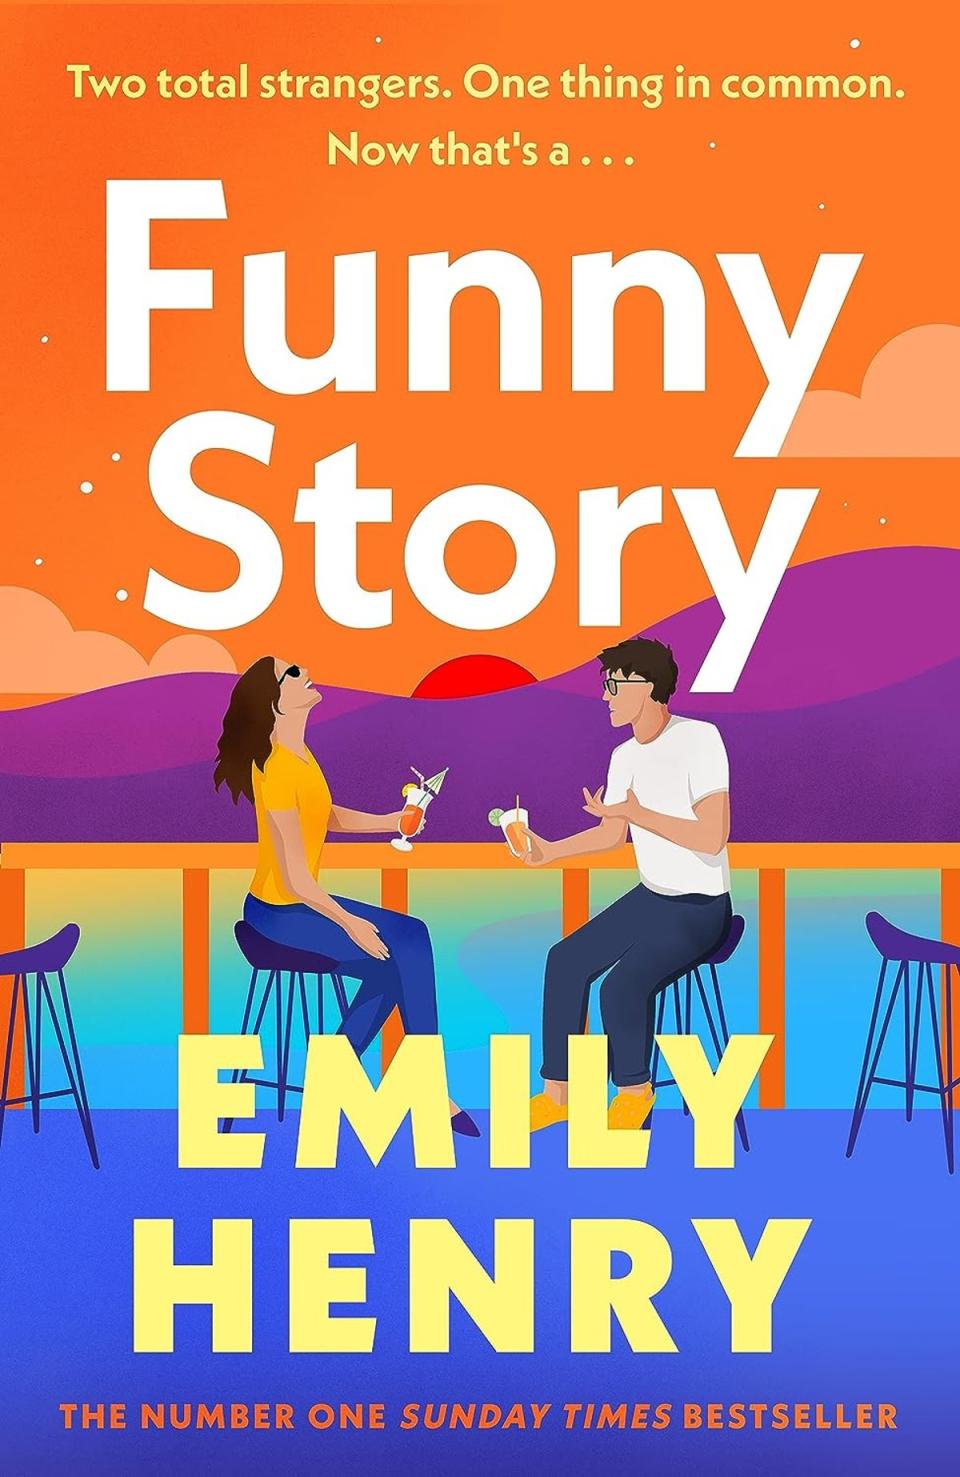 Emily Henry’s new book ‘Funny Story’ is about an ex who moves in with her ex’s ex (source)